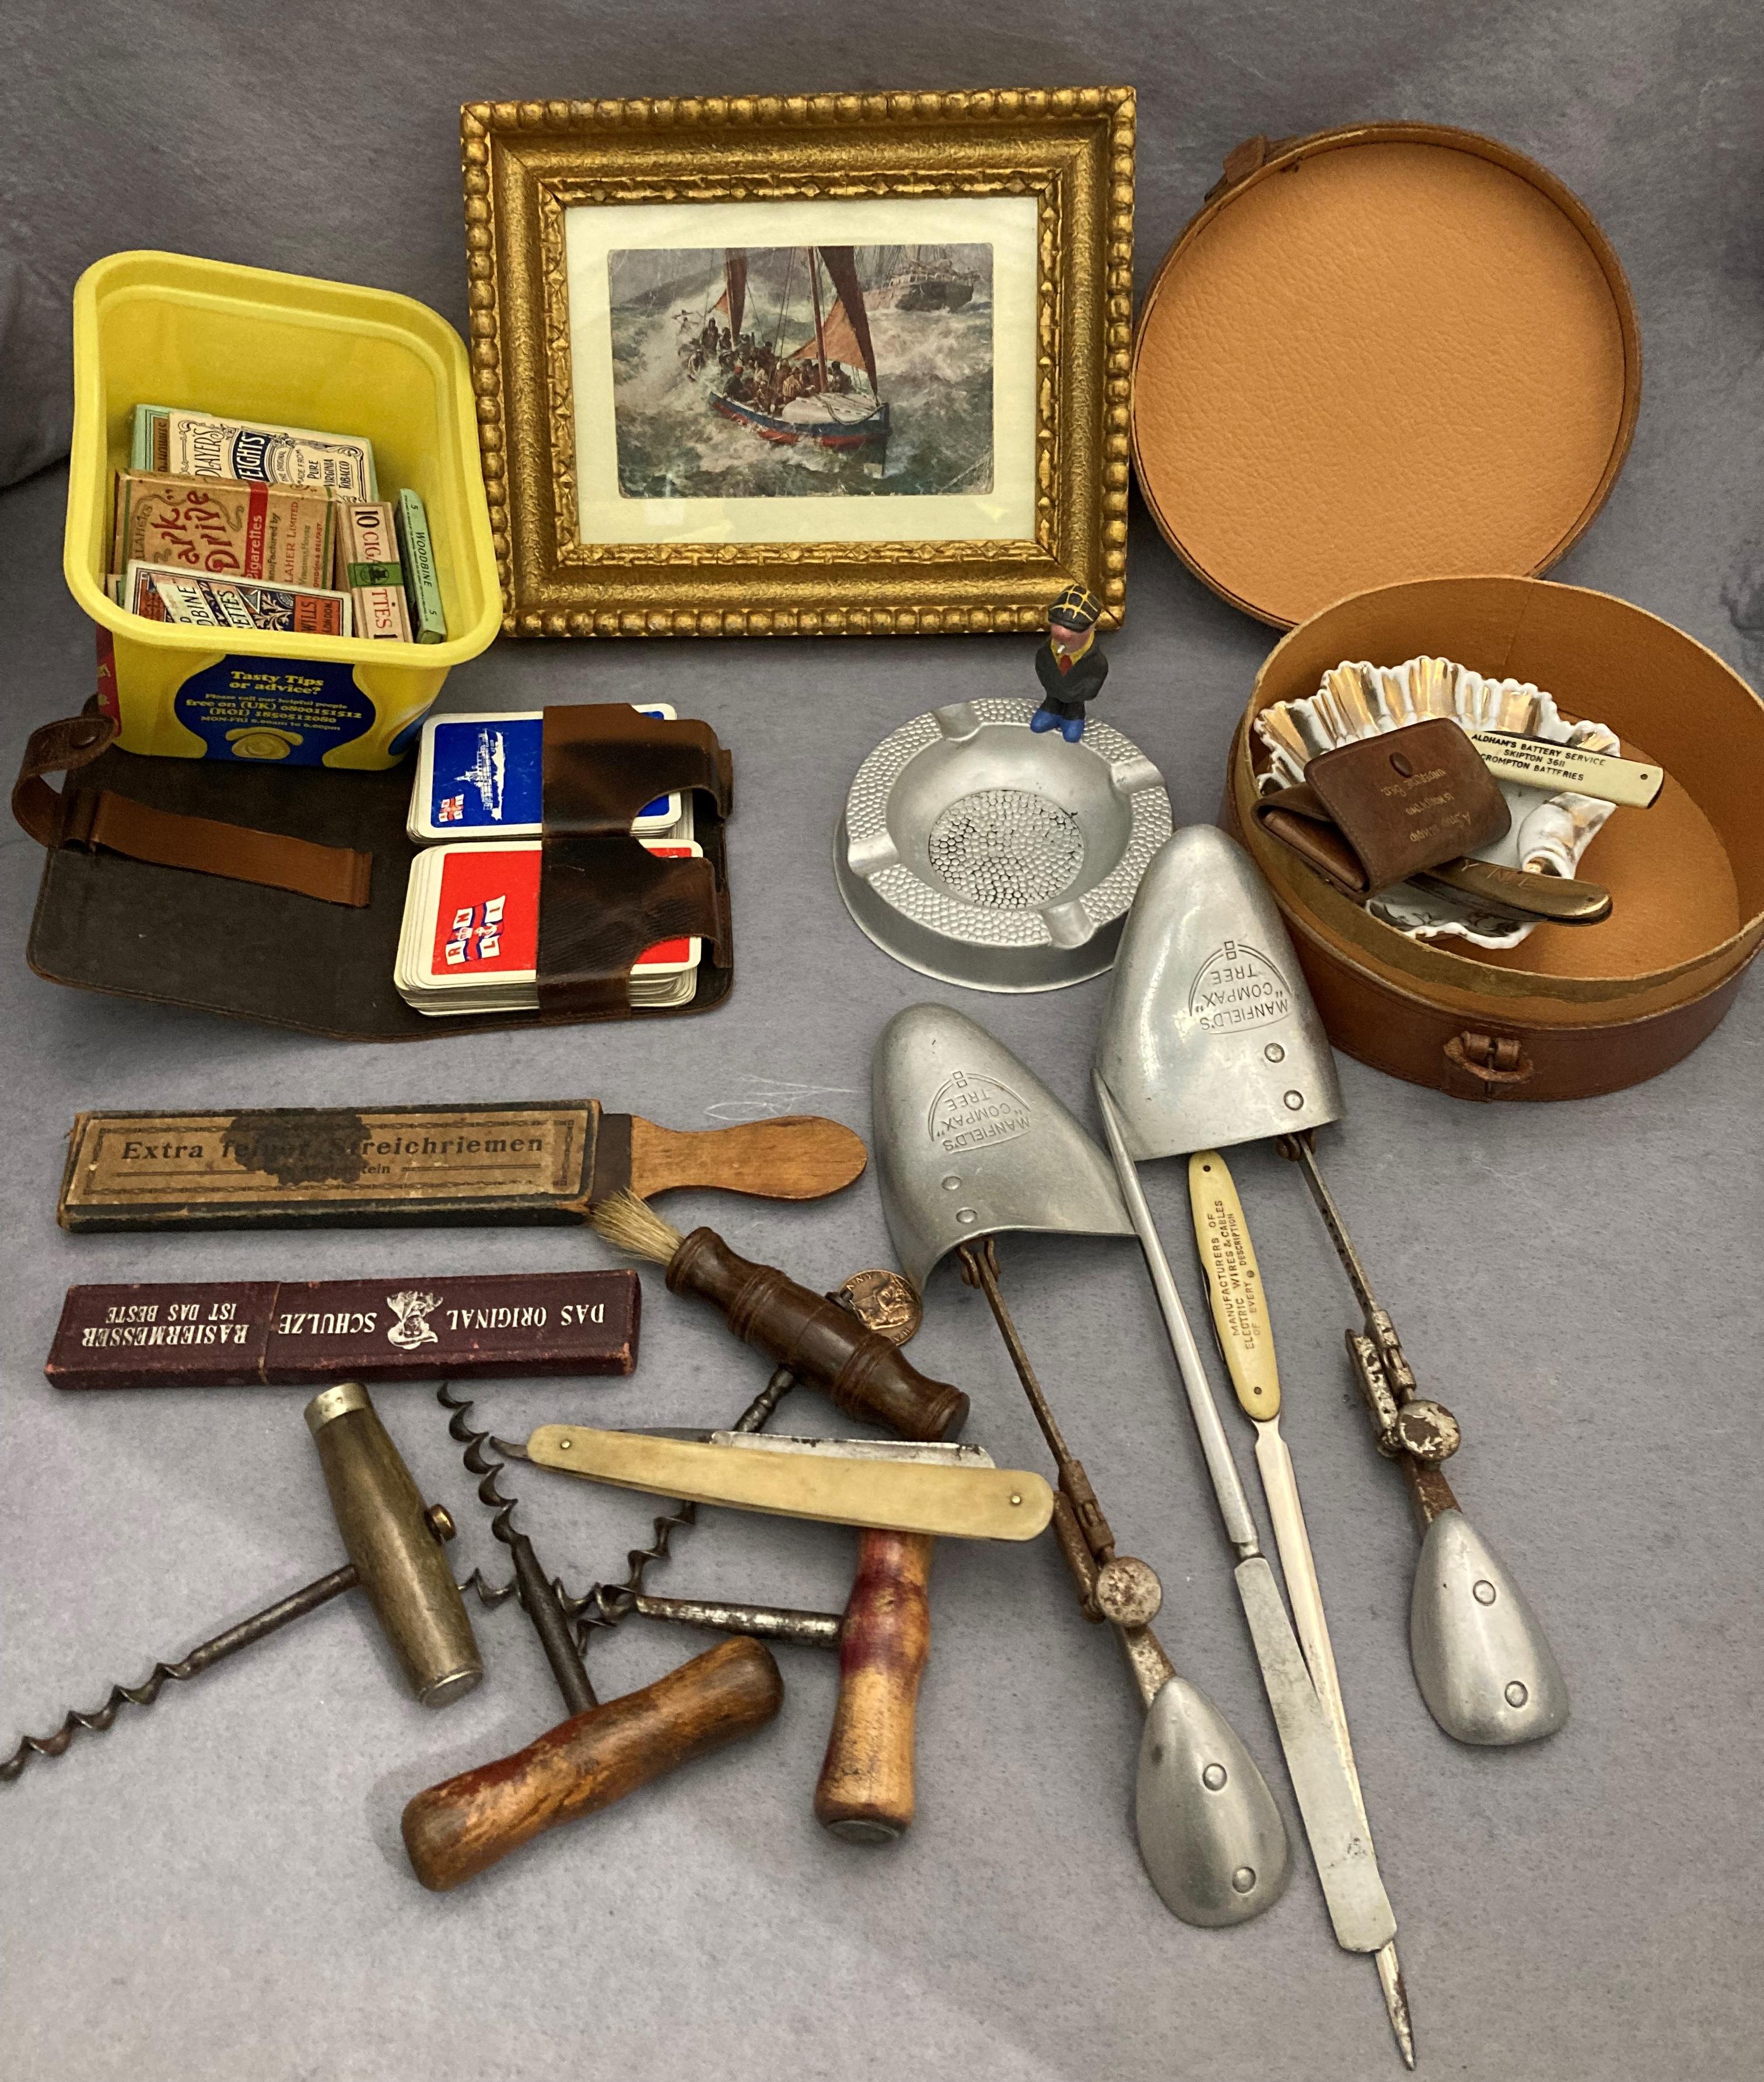 Contents to tray - a quantity of interesting items including Royal Lifeboat Institute picture in